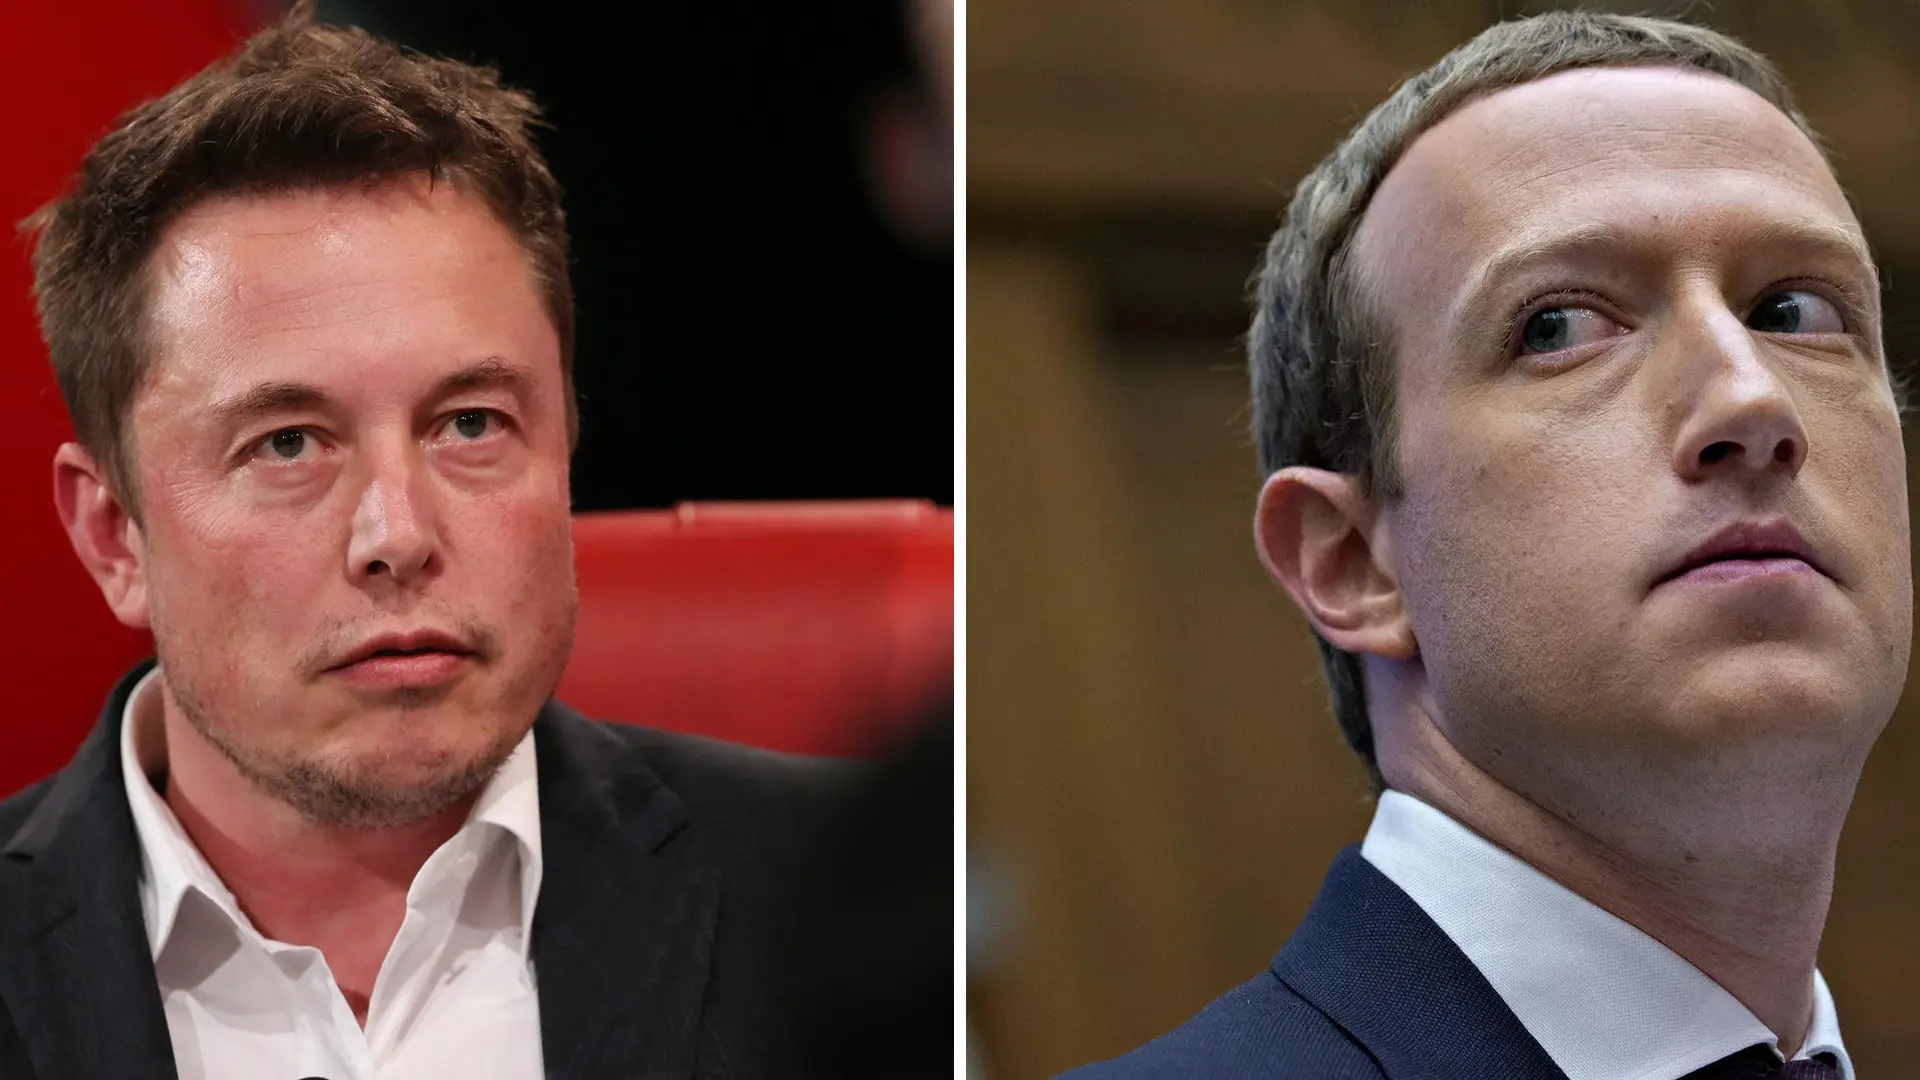 Just in: Elon Musk completely exposes Mark Zuckerberg and Facebook on Twitter